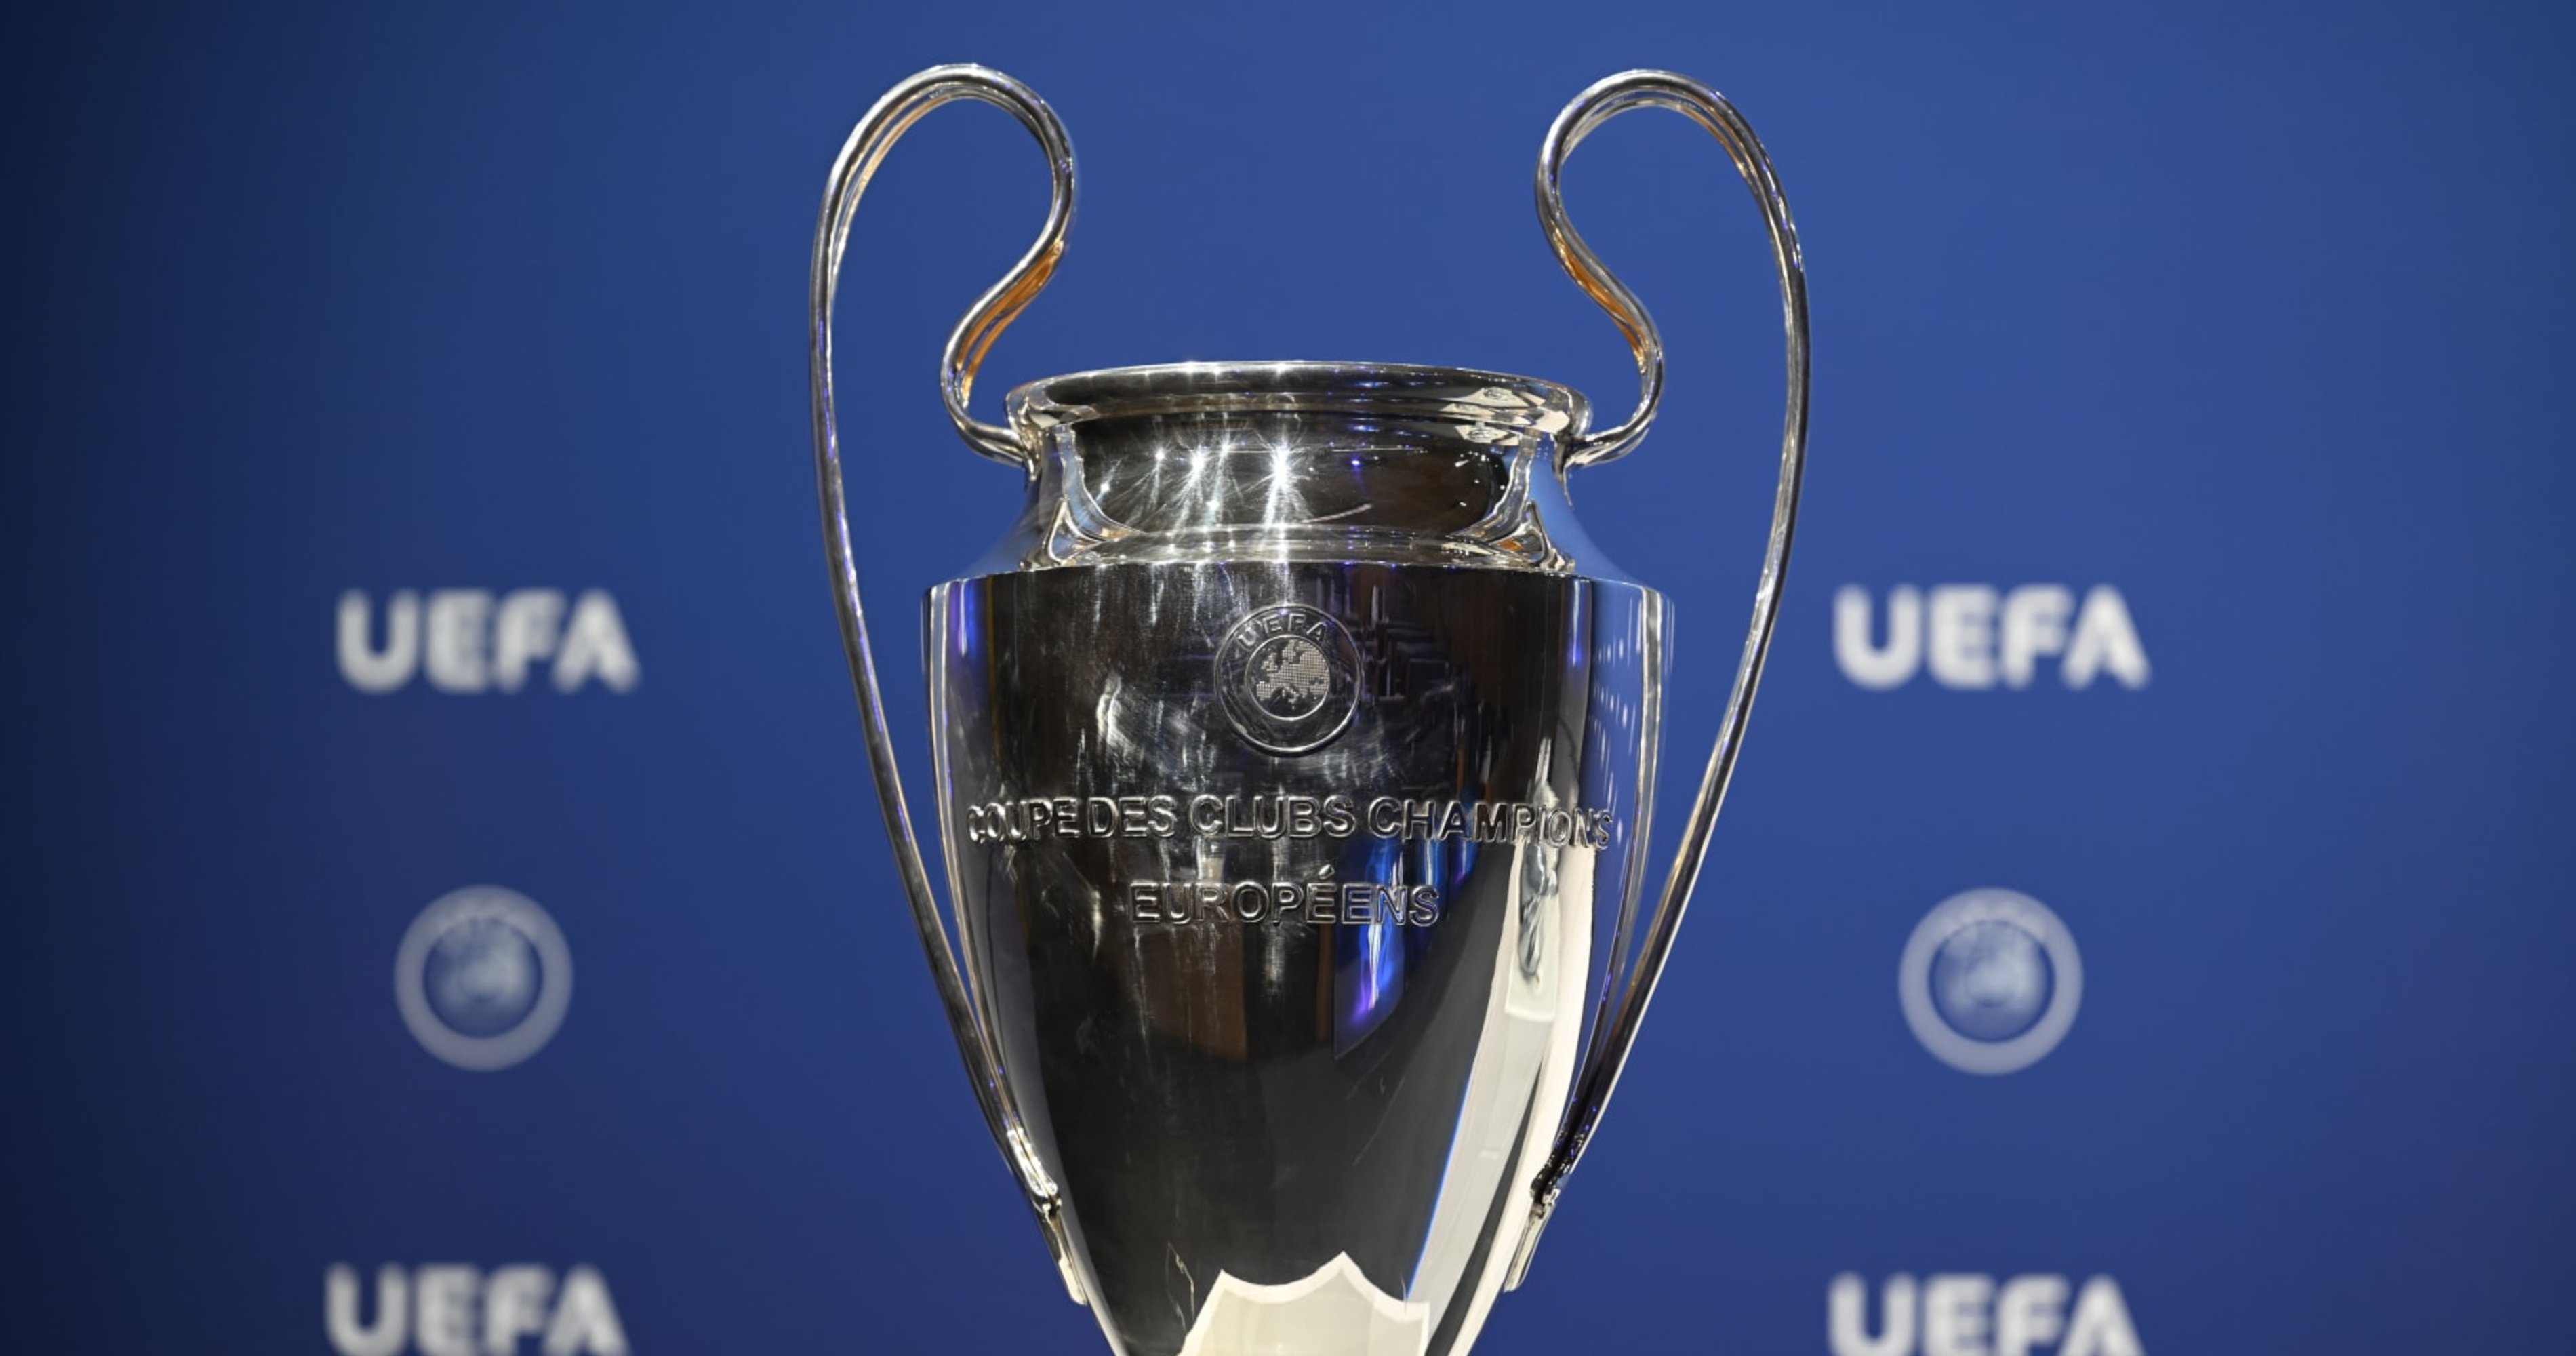 CBS, UEFA Agree to 6-Year, $1.5B Contract for Champions League